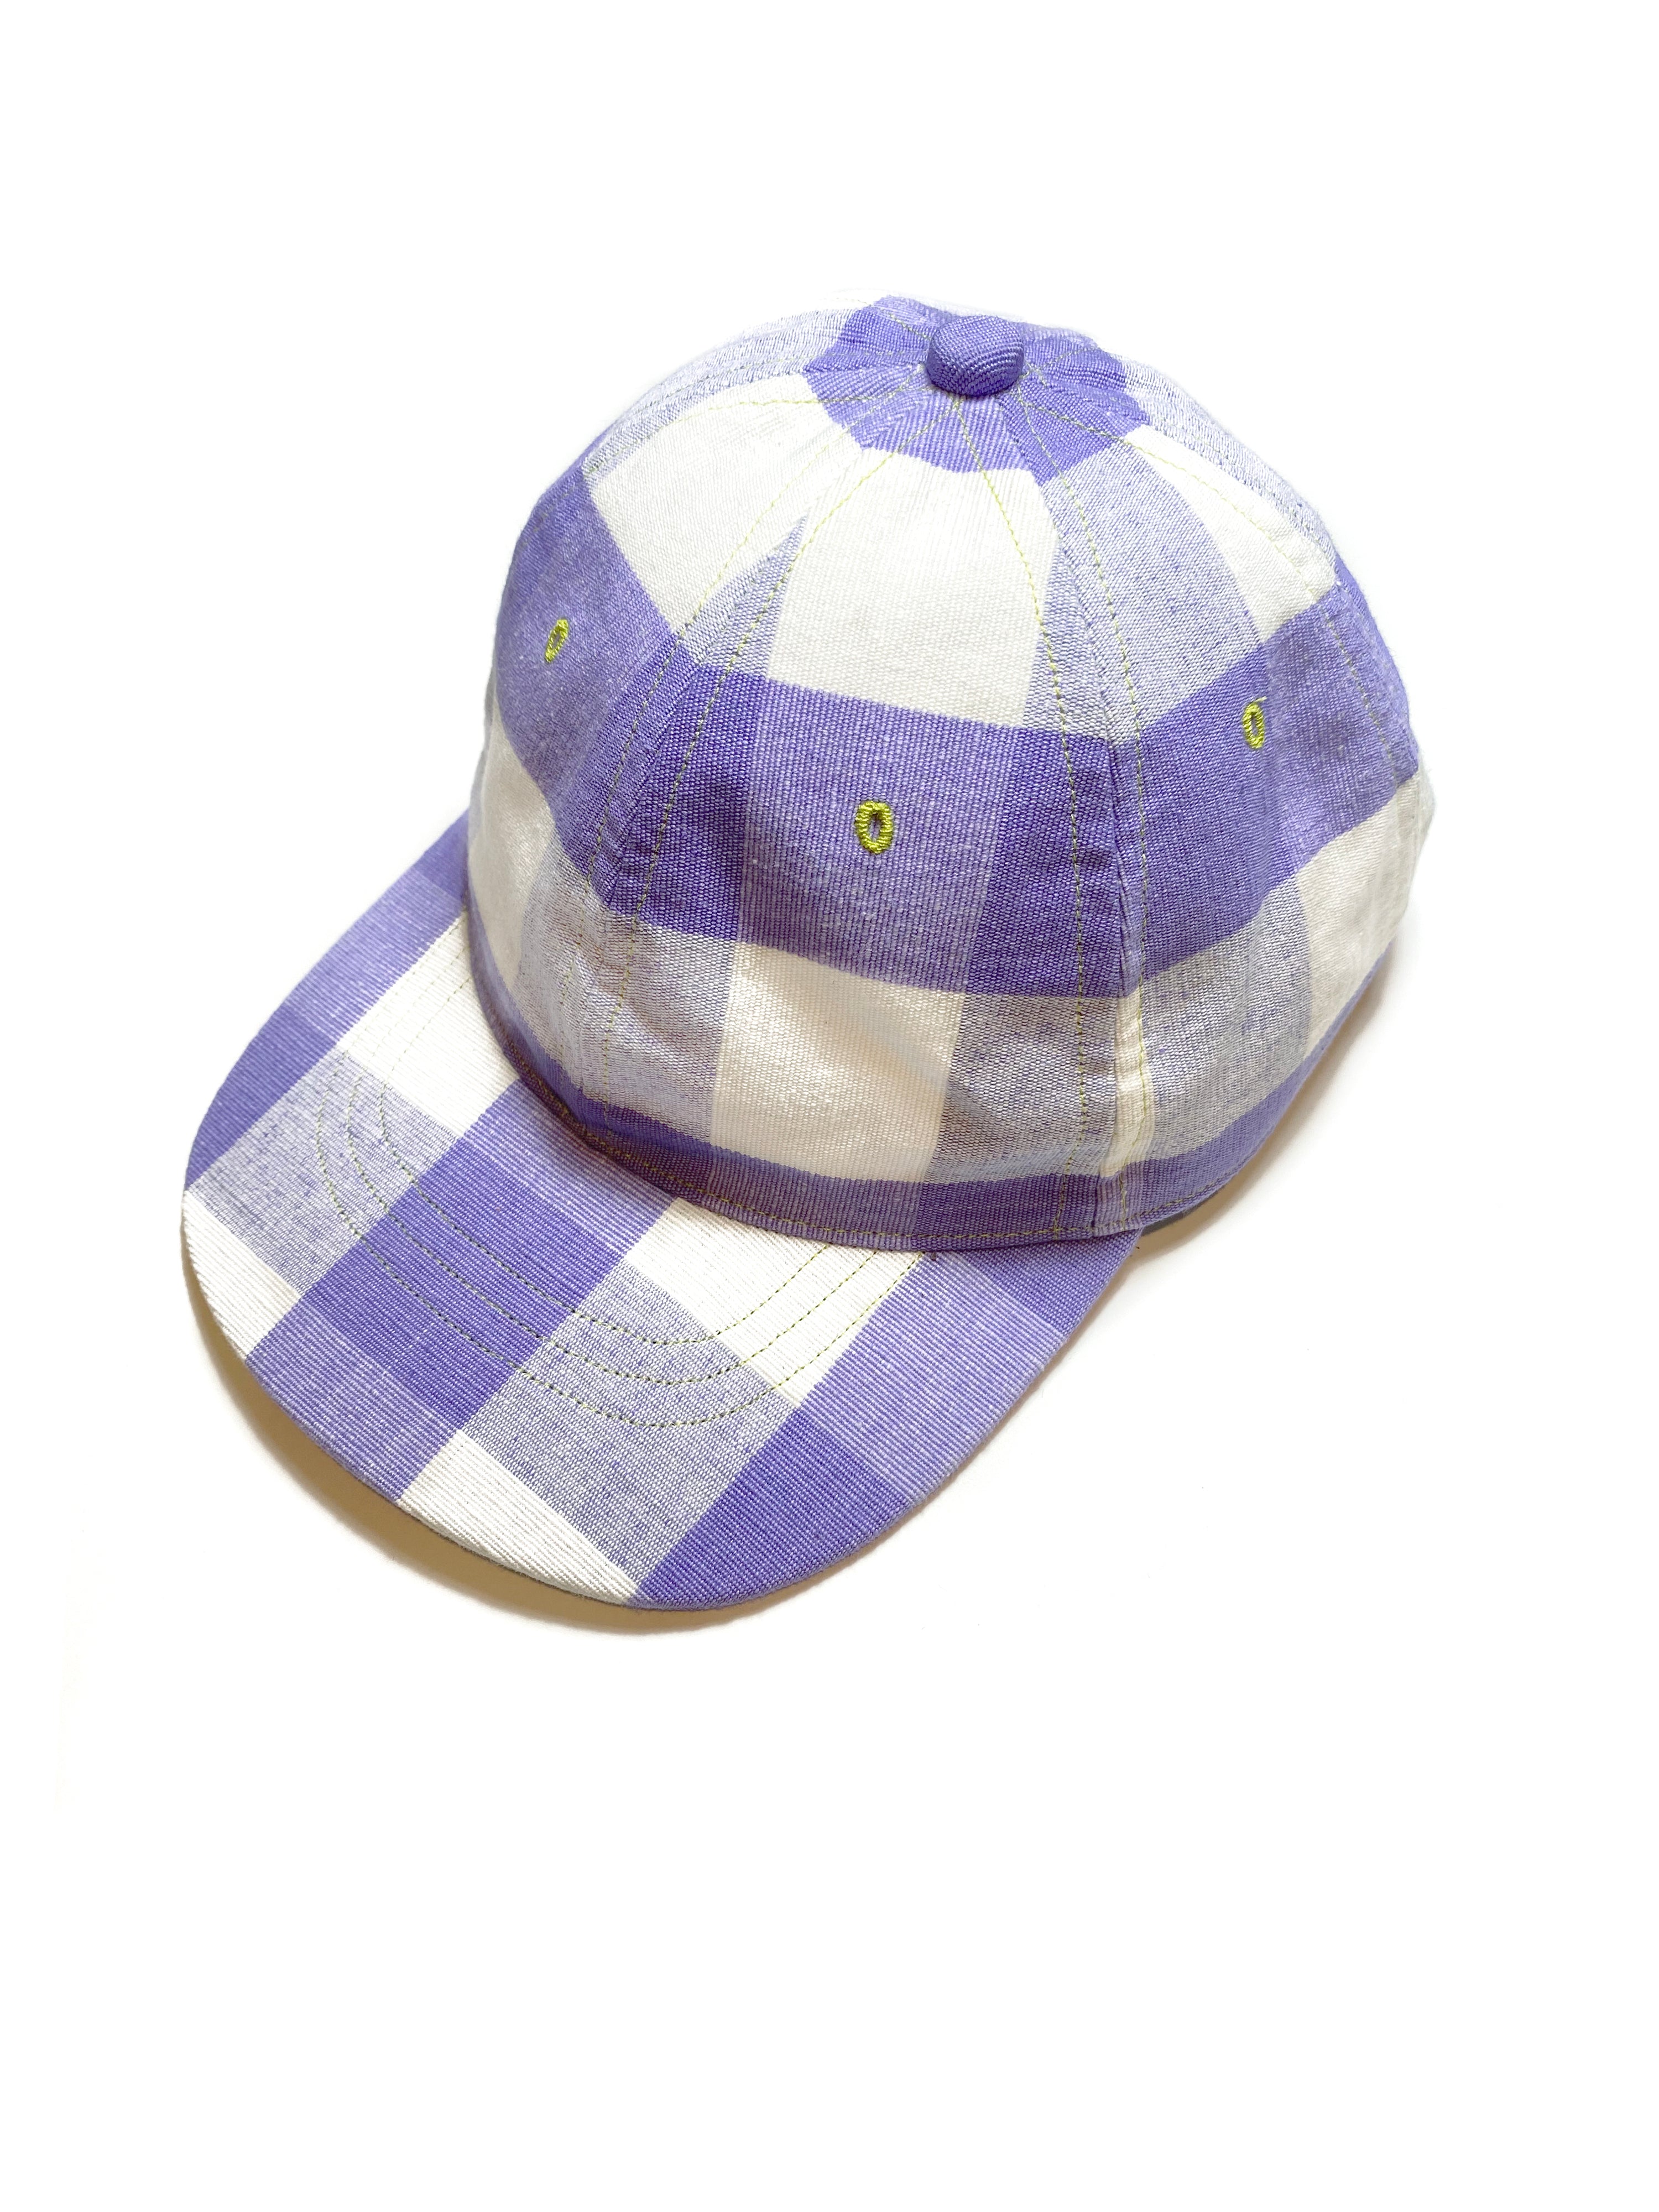 "Lavender Picnic" Floral Hat - Late to the Party